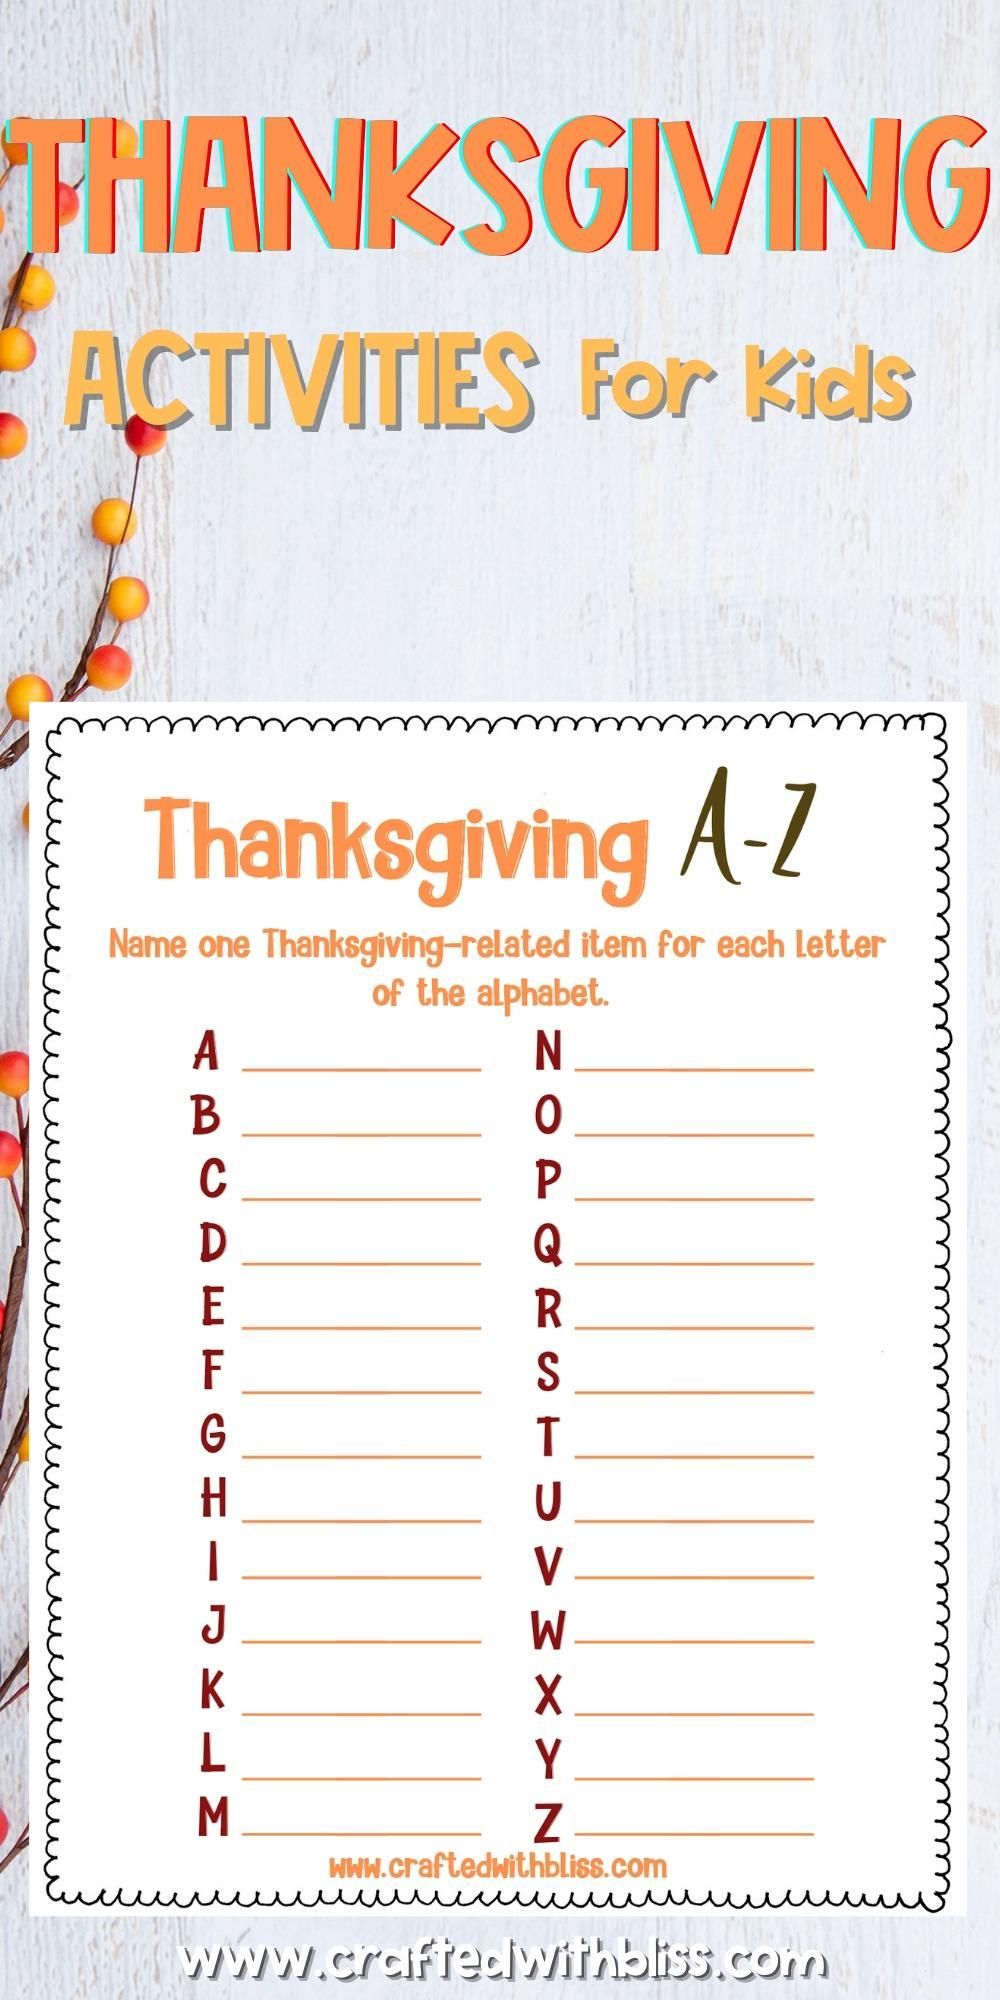 19 thanksgiving crafts for kids ideas